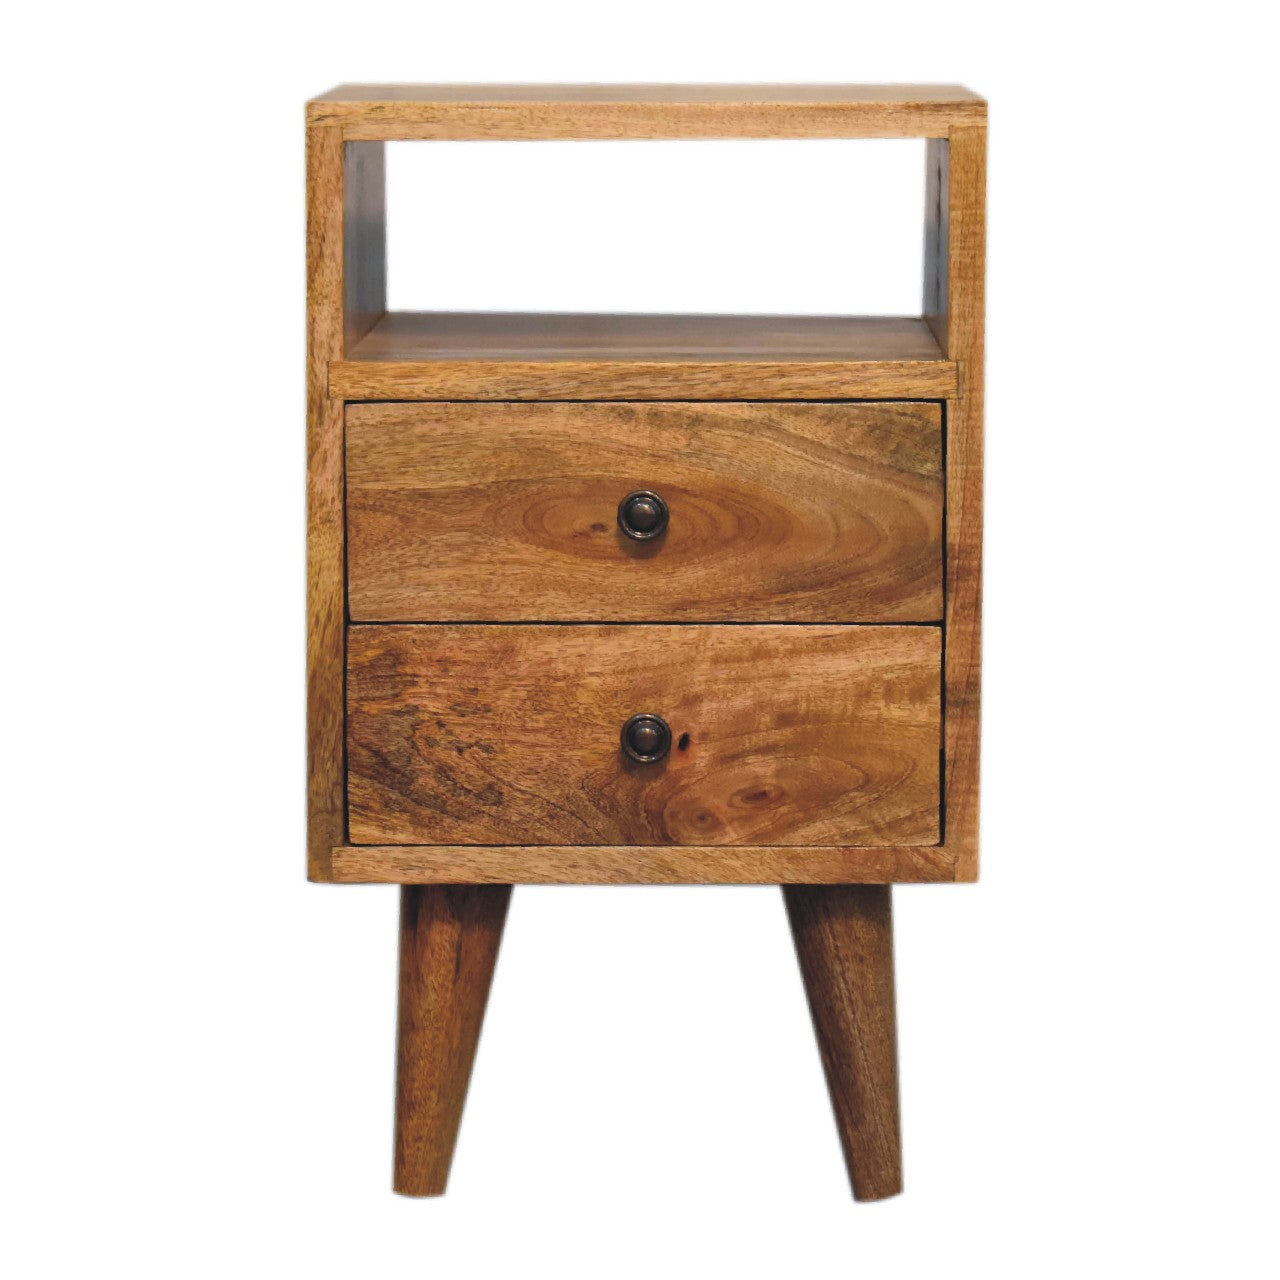 View Mini Classic Oakish Bedside with Open Slot information